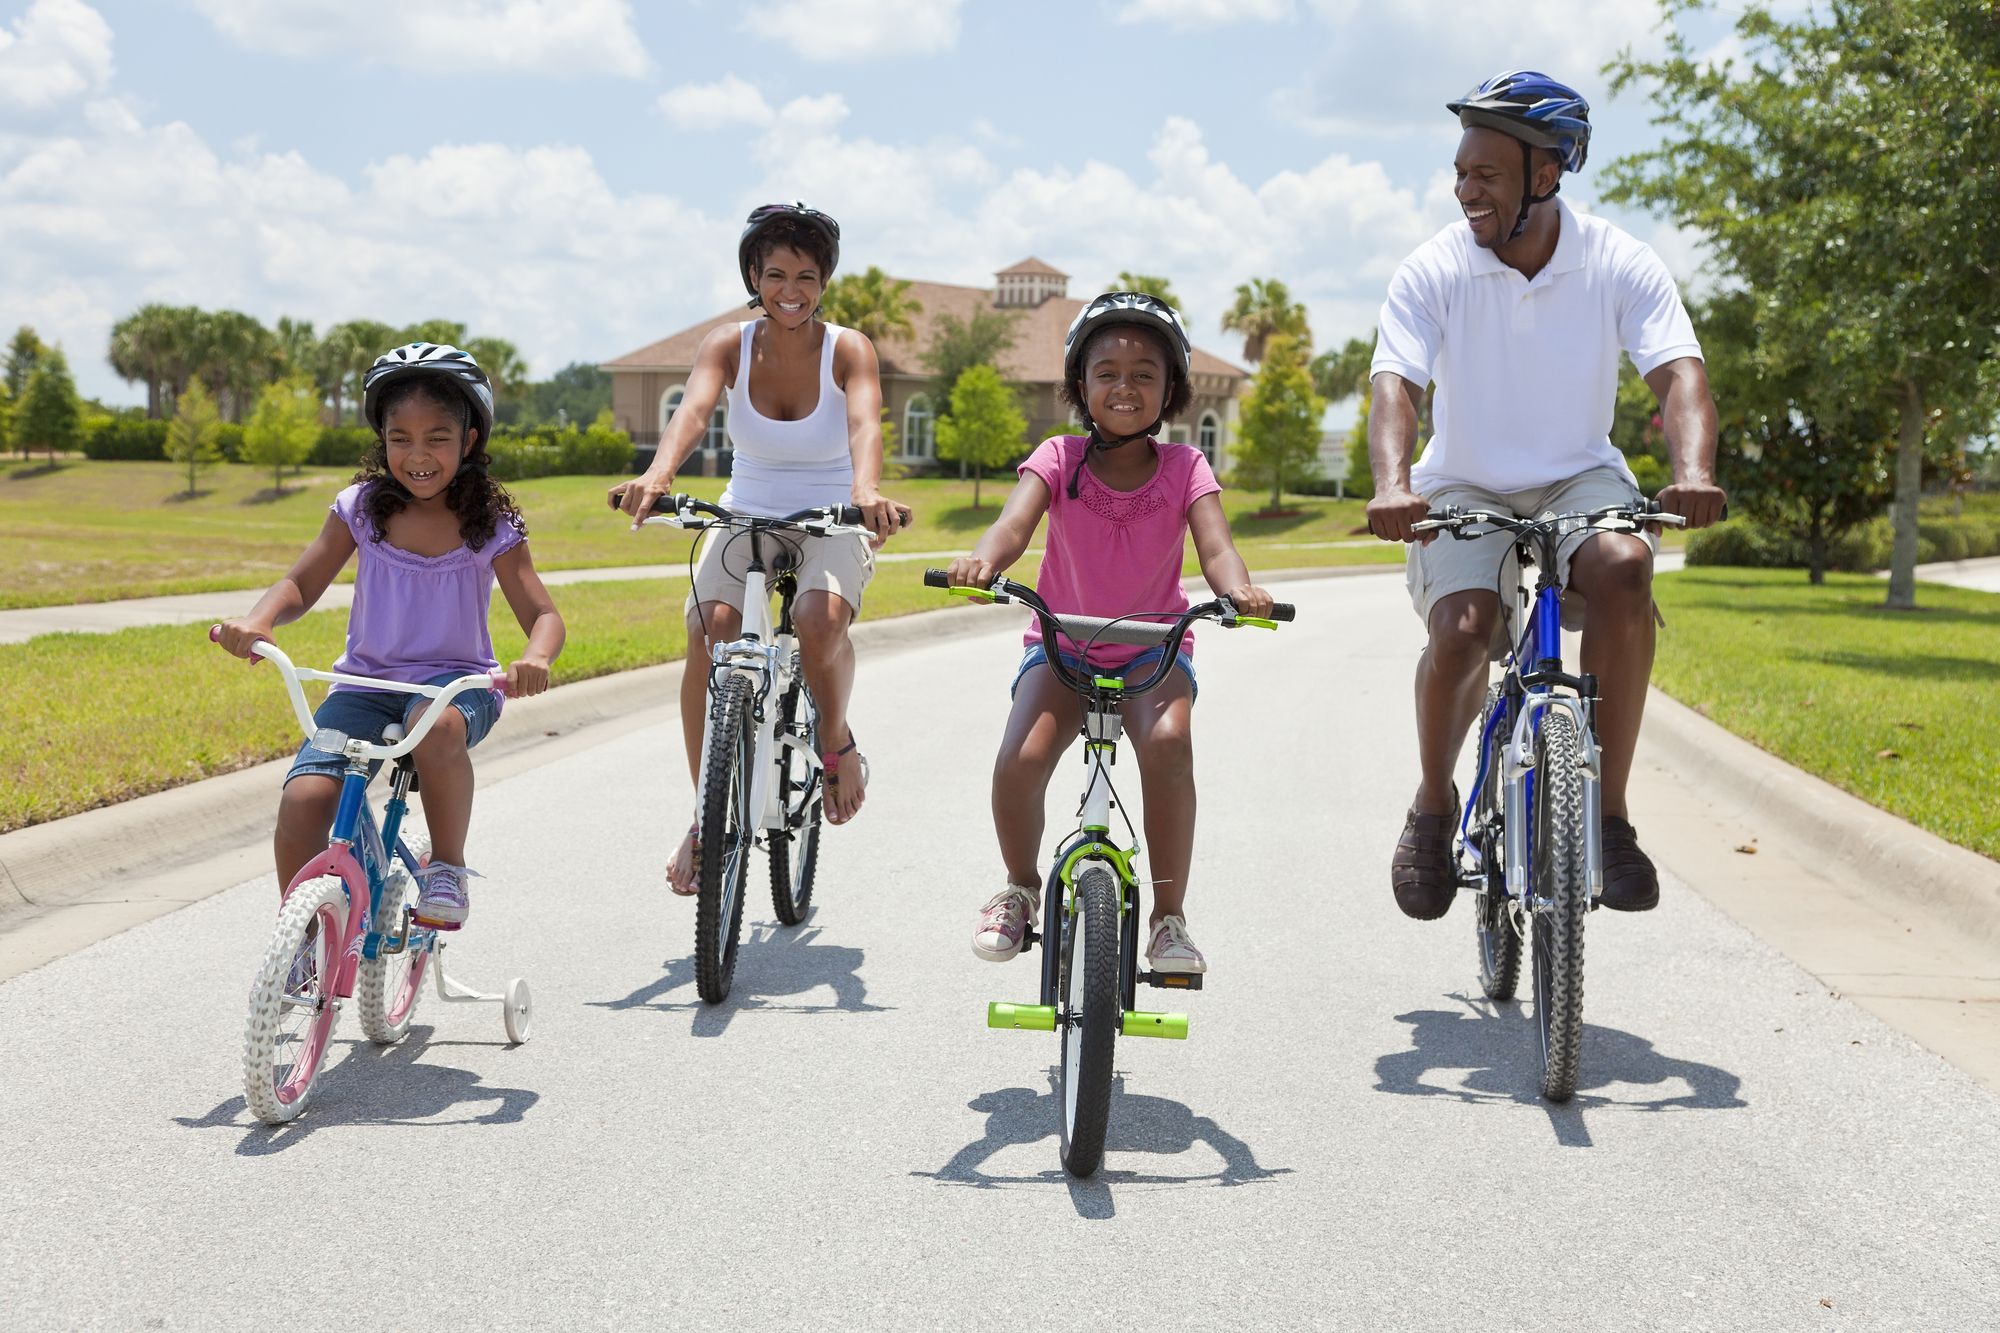 spend time with your family exercising